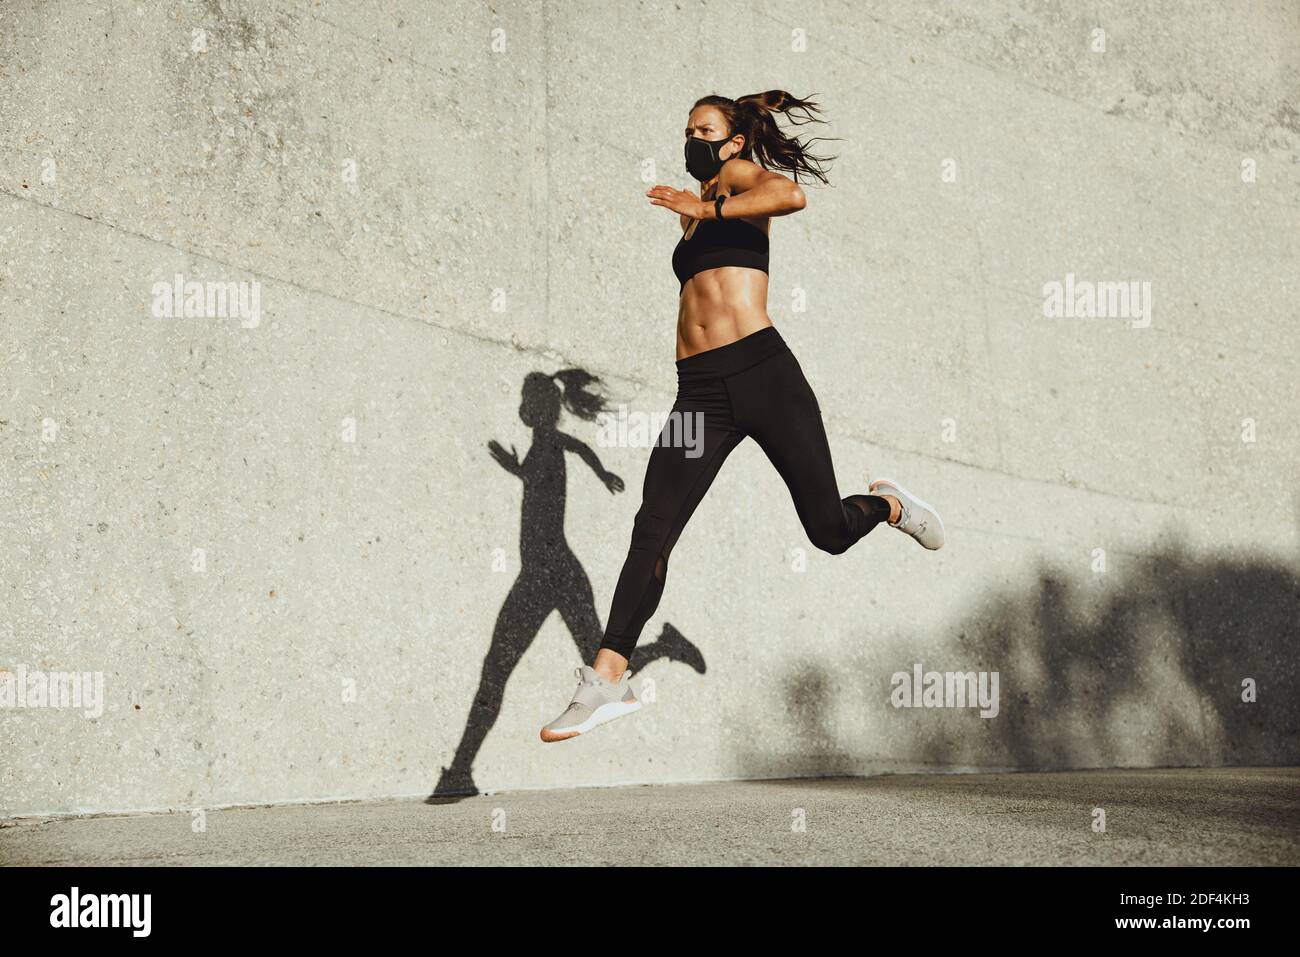 Athletic woman with face mask running outdoors. Female runner in sports clothing and protective face mask sprinting outdoors. Stock Photo